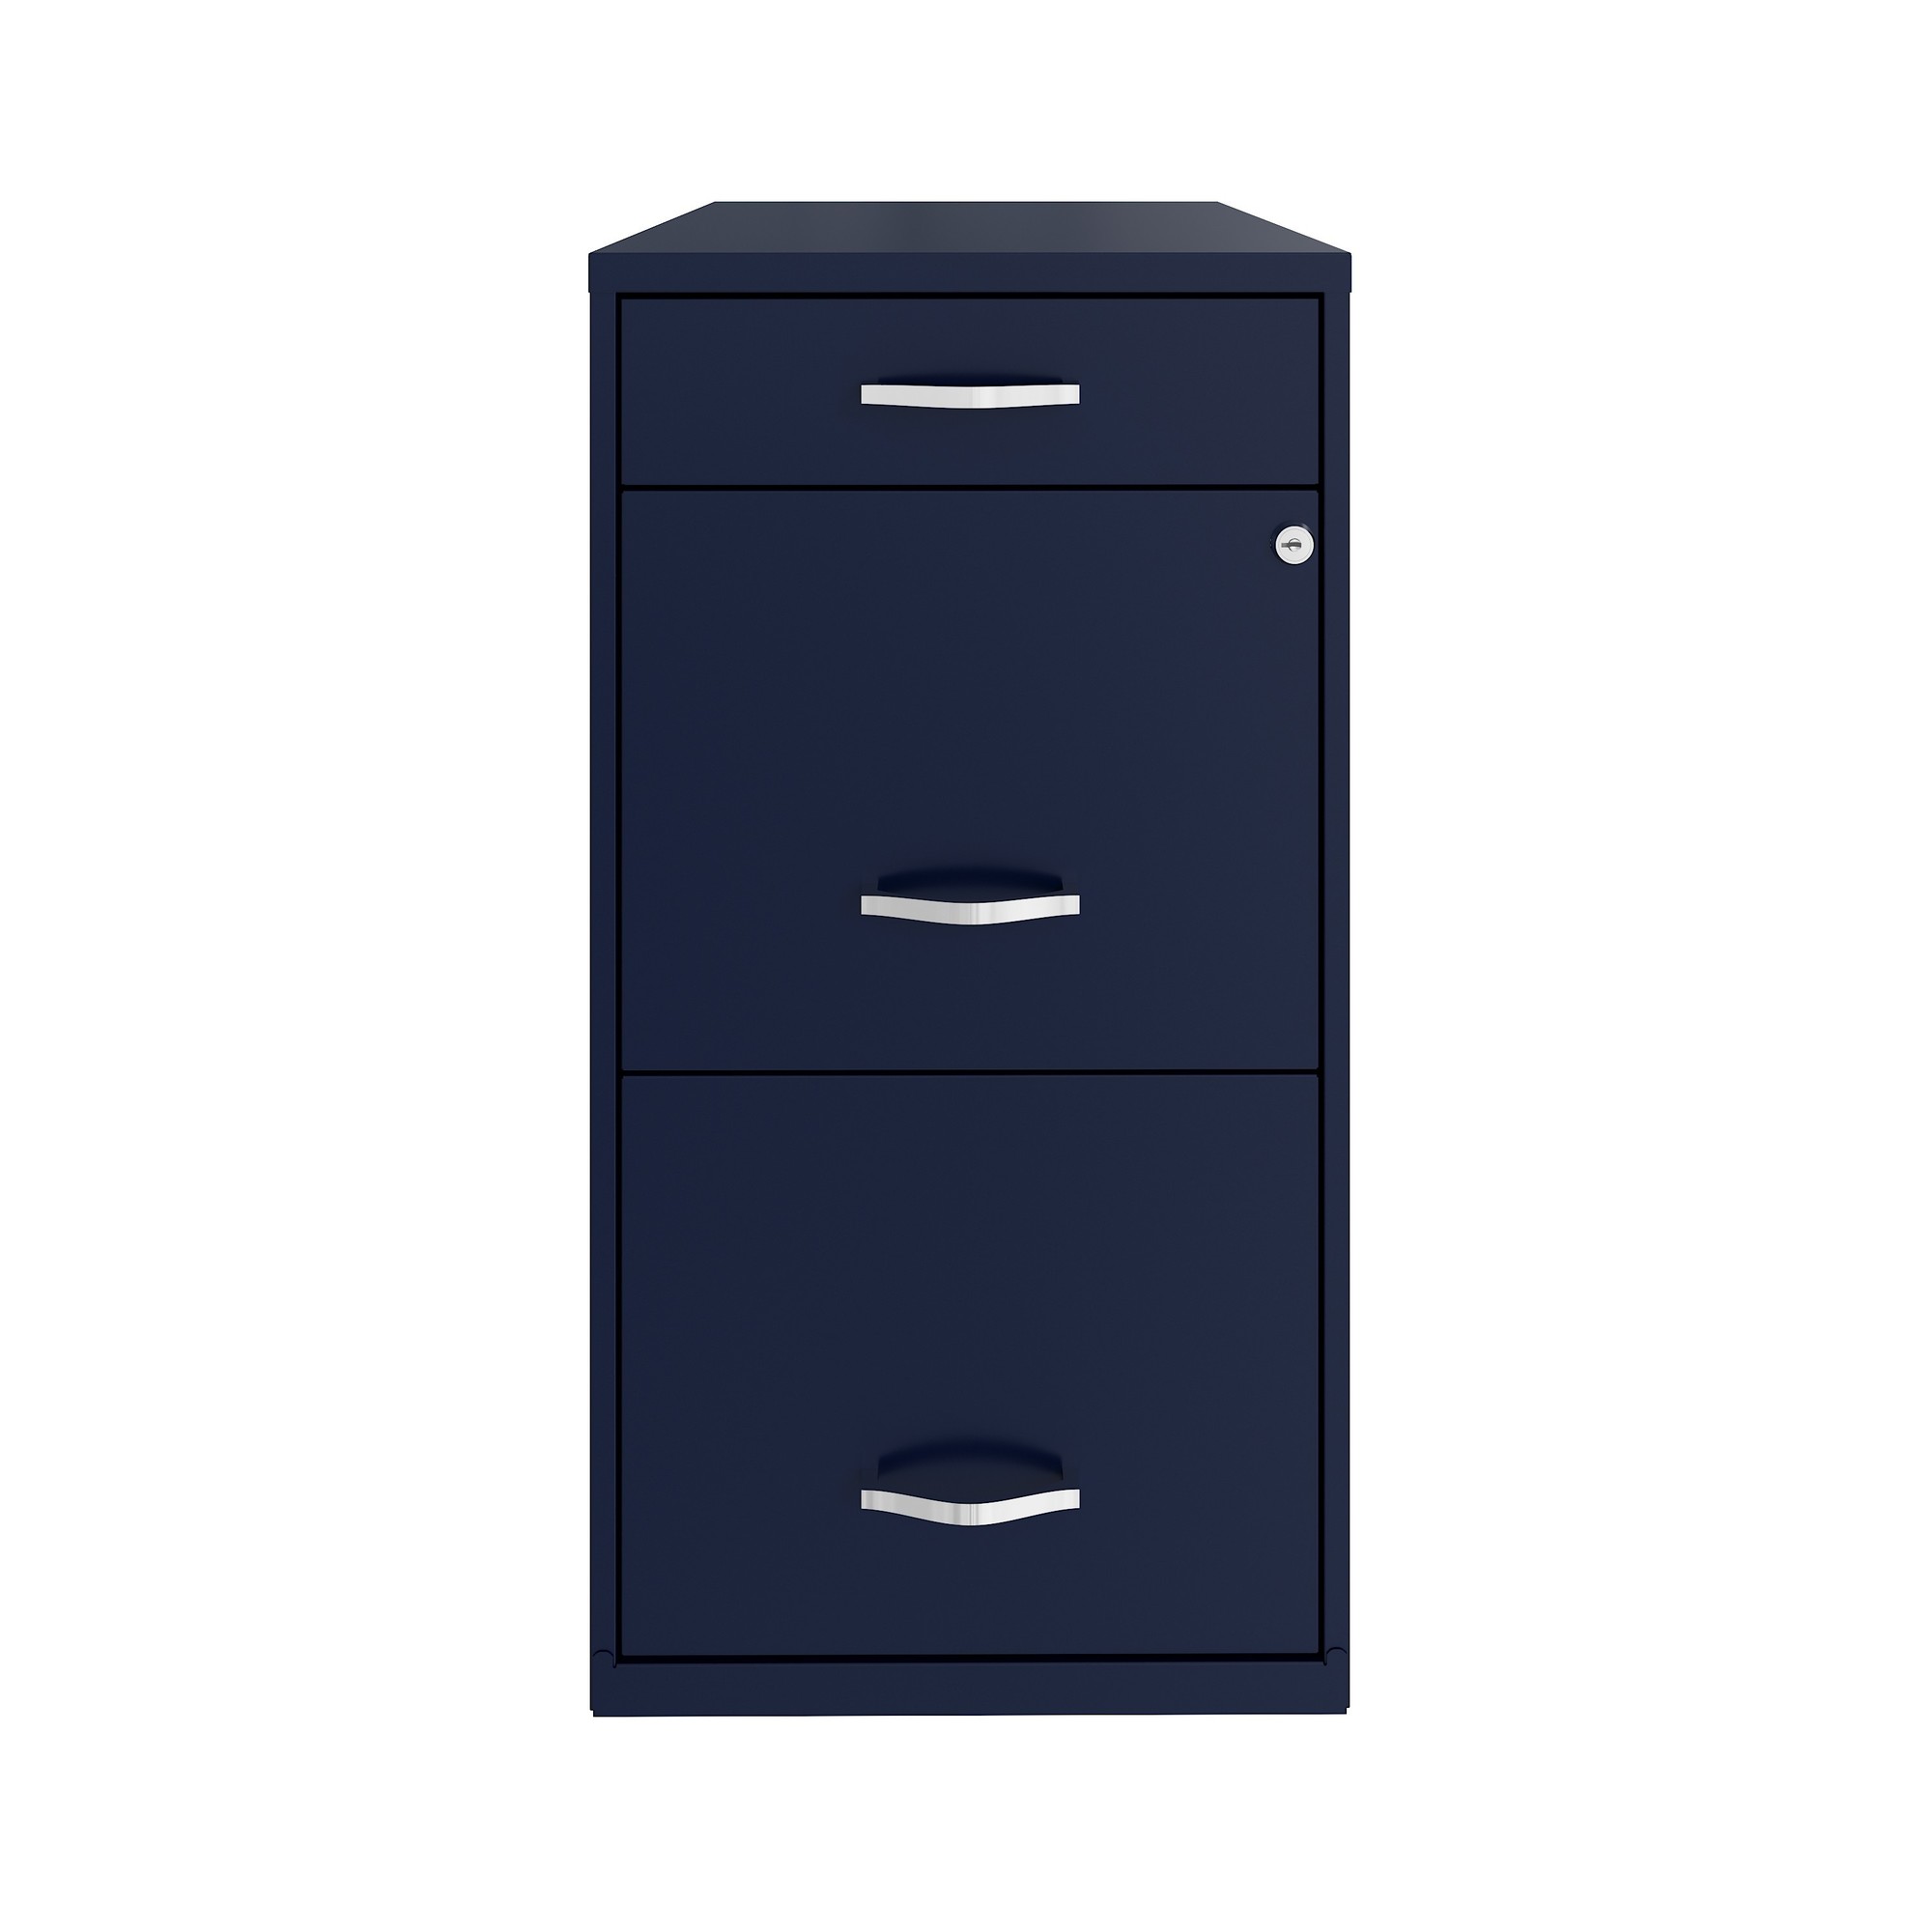 Hirsh Industries, 3 Drawer Letter Width File Cabinet, Pencil Drawer, Width 14.25 in, Depth 18 in, Height 27.32 in, Model 24414